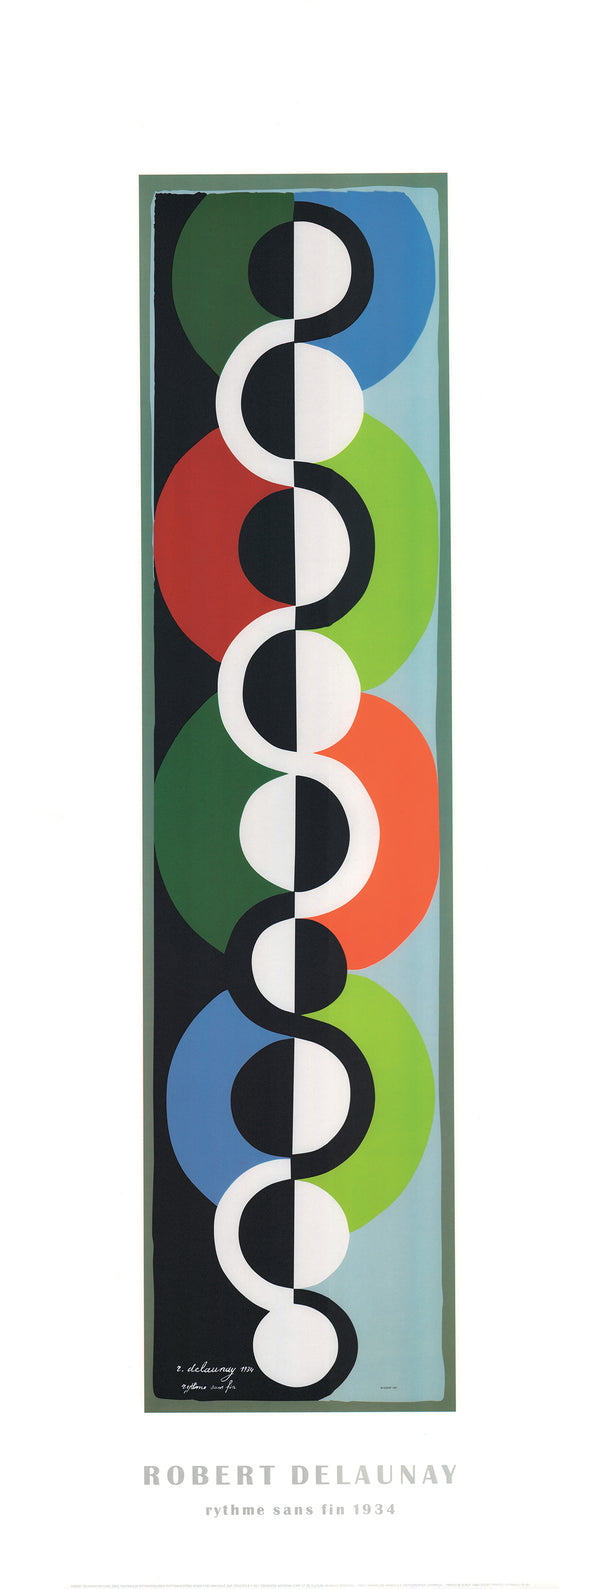 Endless Rhythm, 1934 by Robert Delaunay - 18 X 47 Inches (Offset Lithograph)